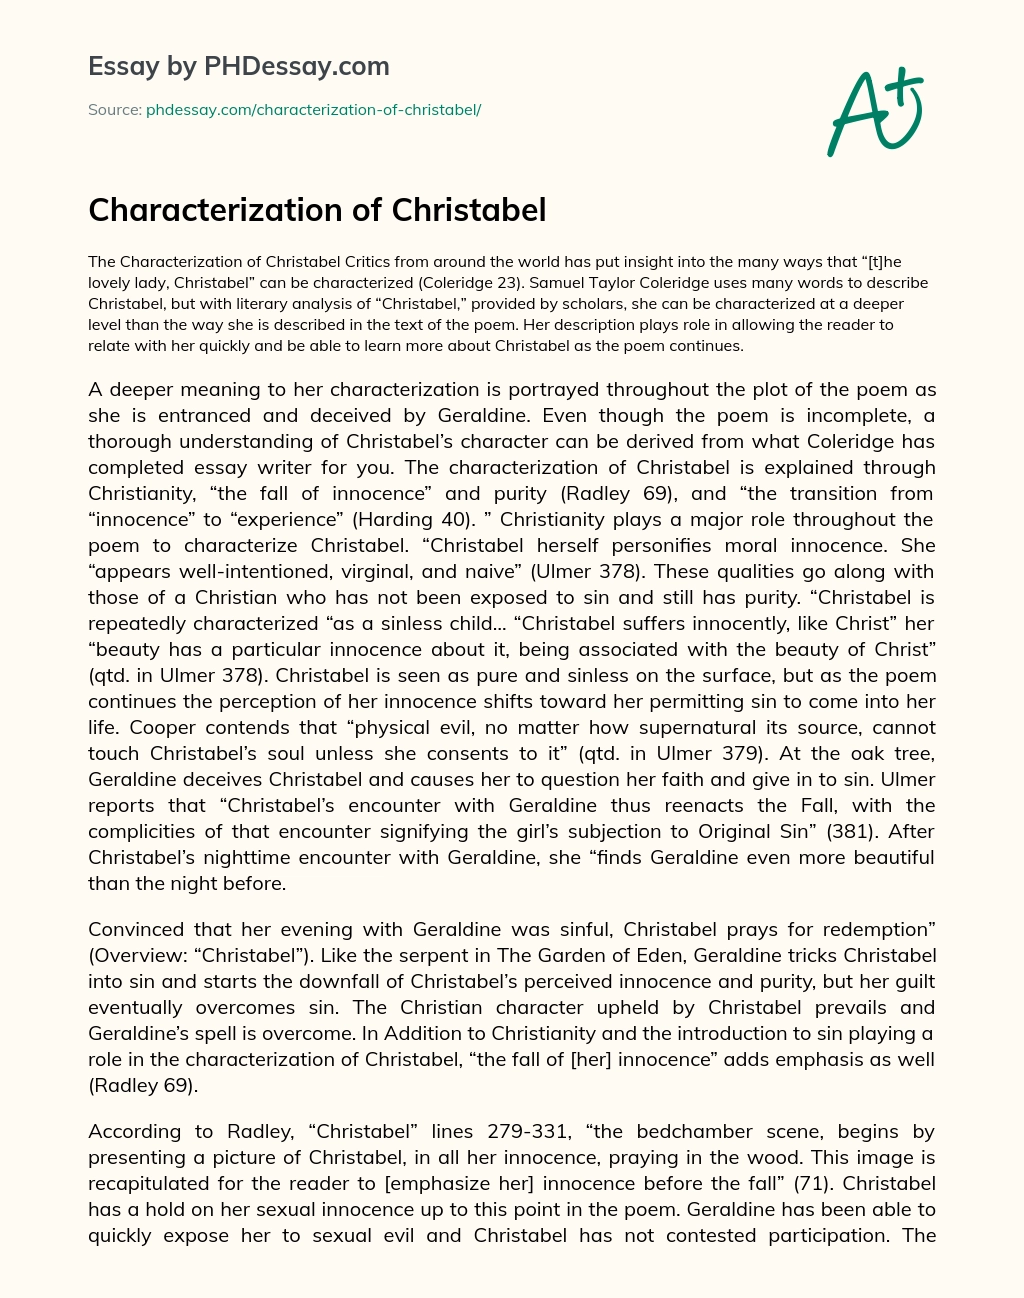 Characterization of Christabel essay